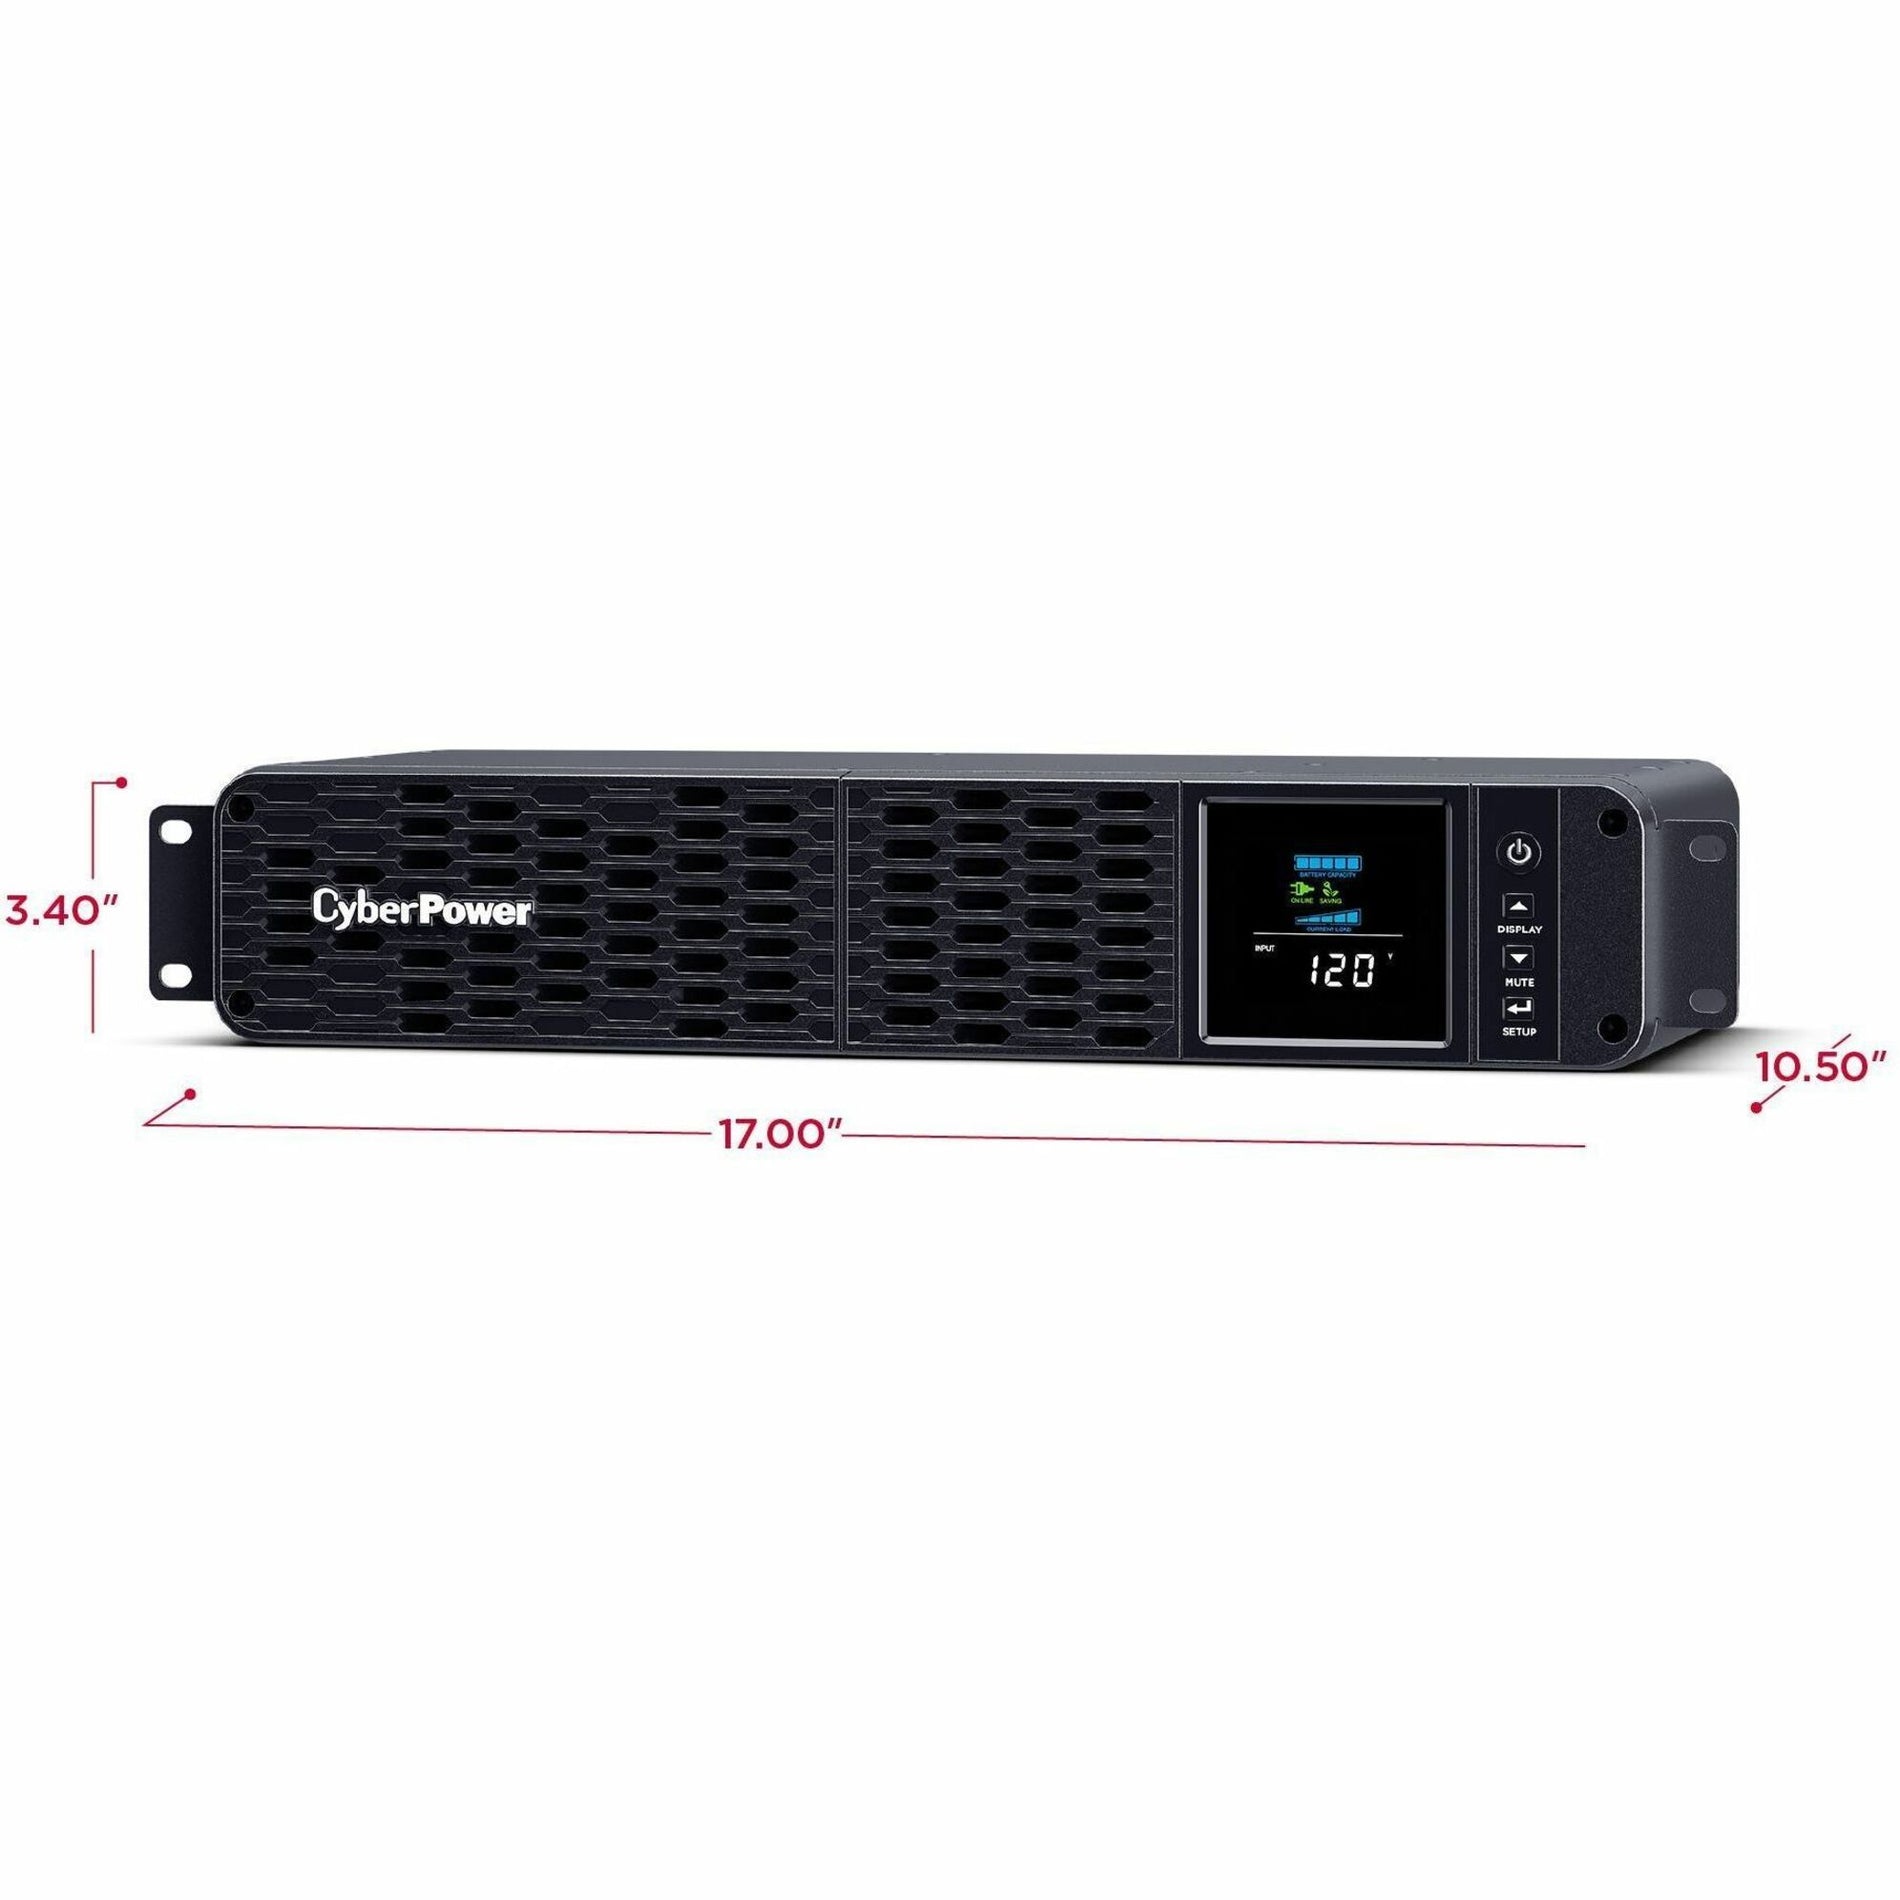 CyberPower CP1500PFCRM2U PFC Sinewave UPS Systems, 1500 VA/1000 W, Multifunction LCD, 3 Year Warranty